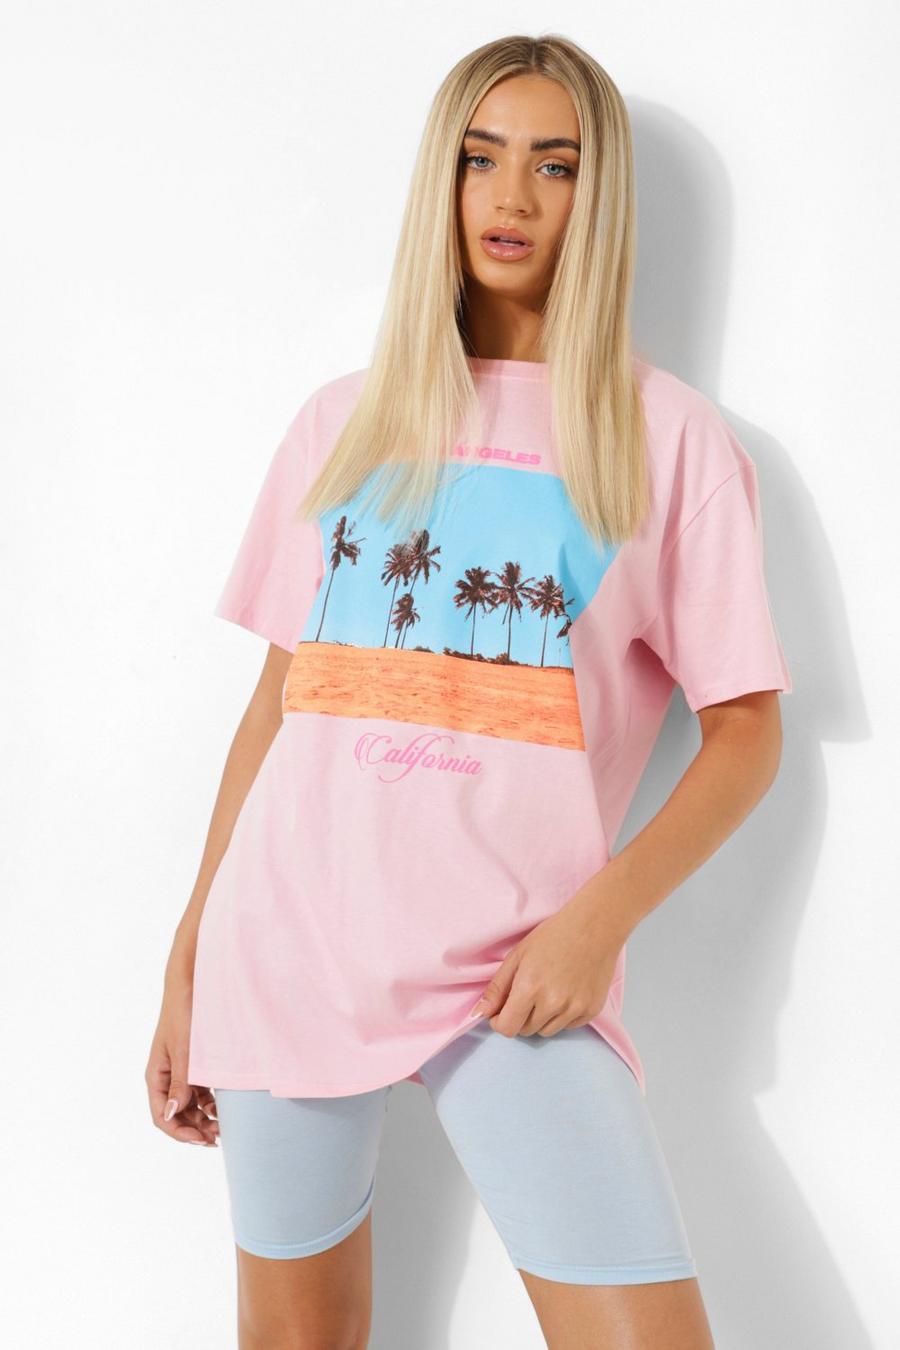 T-shirt Oversize con stampa di palme californiane, Pale pink rosa image number 1